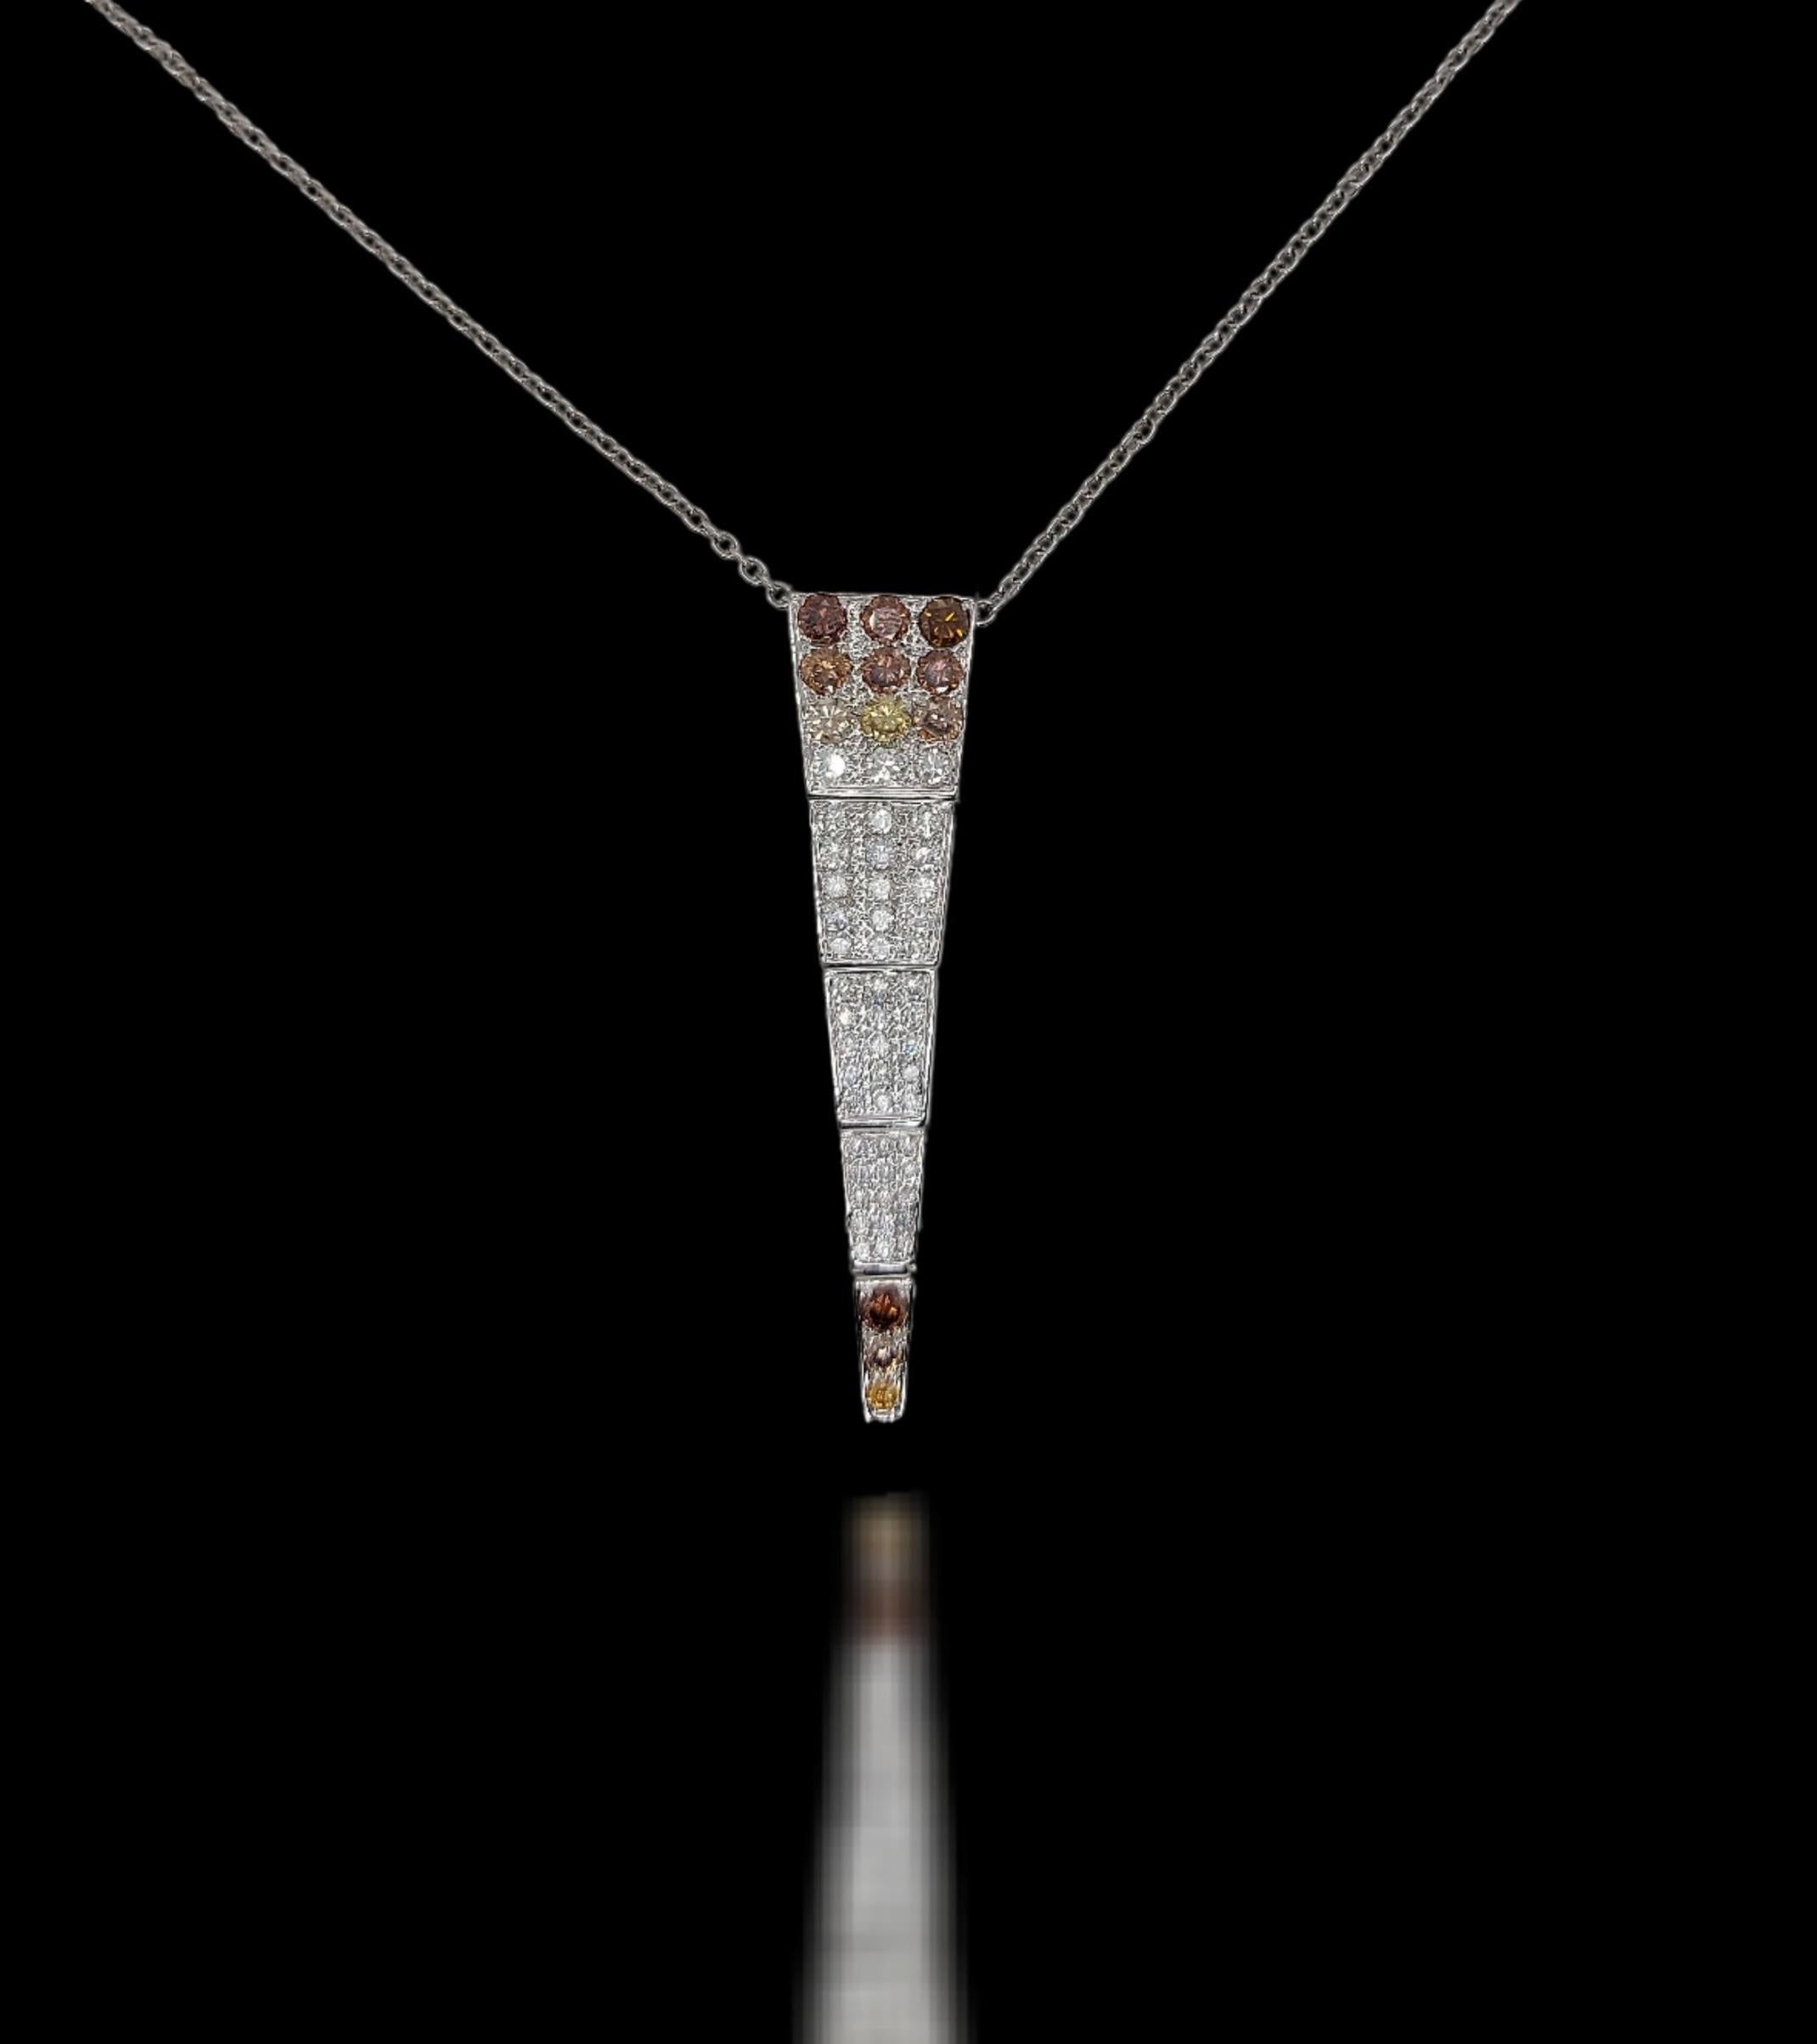 18kt White Gold Pendant and Necklace With 4.9ct White, Yellow and Cognac Diamonds

White gold Necklace 39cm long

Diamonds: Brilliant cut diamonds, together ca. 4.90ct

Material: 18kt white gold

Measurements: 14 mm x 63 mm

Total weight: 13.8 grams